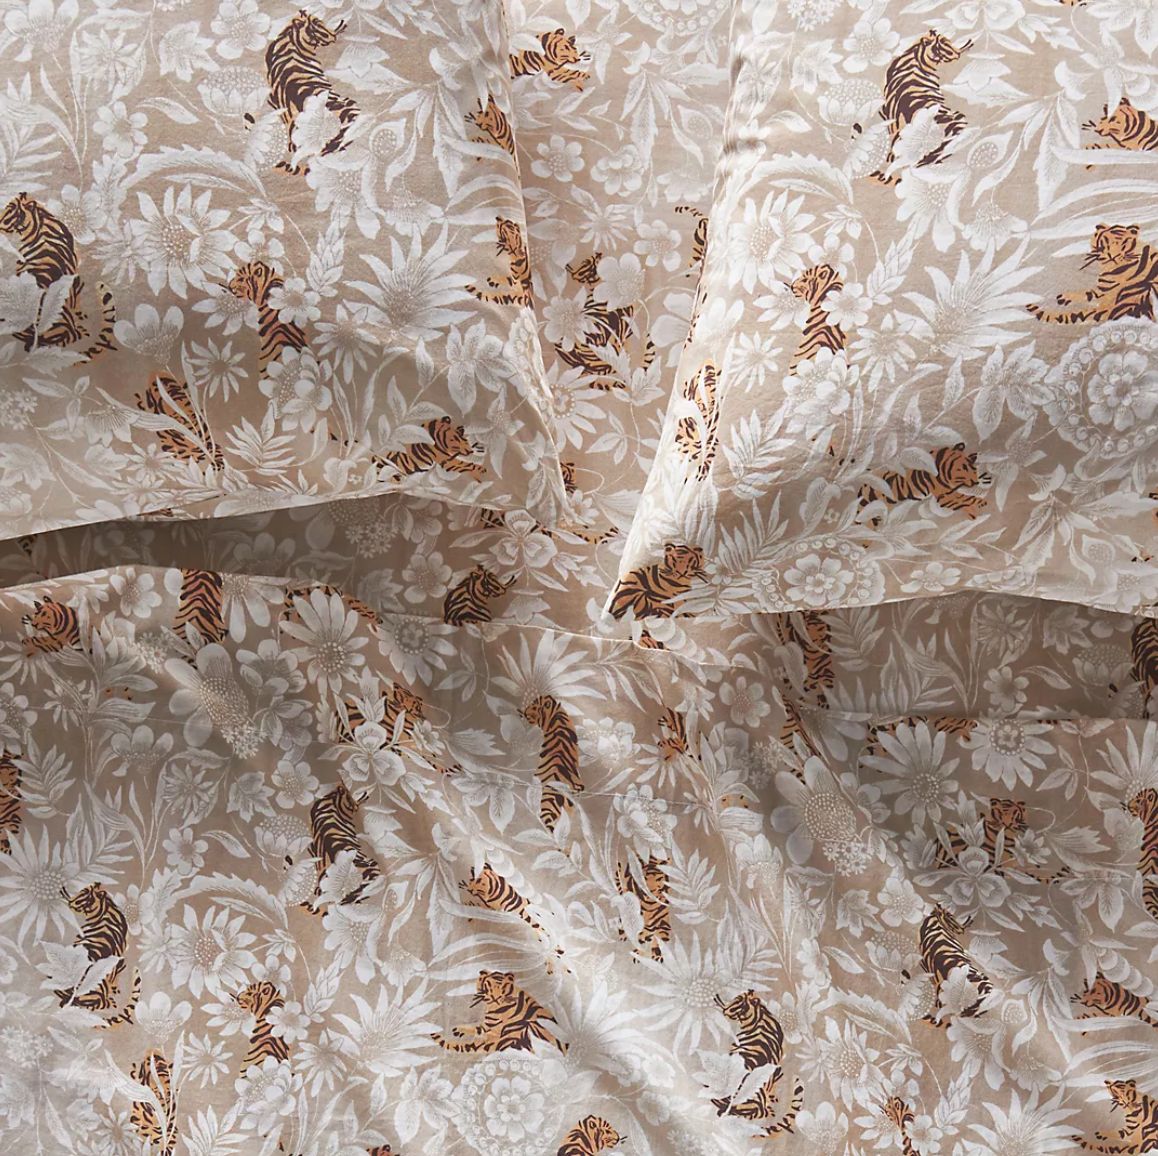 Close-up of a floral and tiger pattern sheets